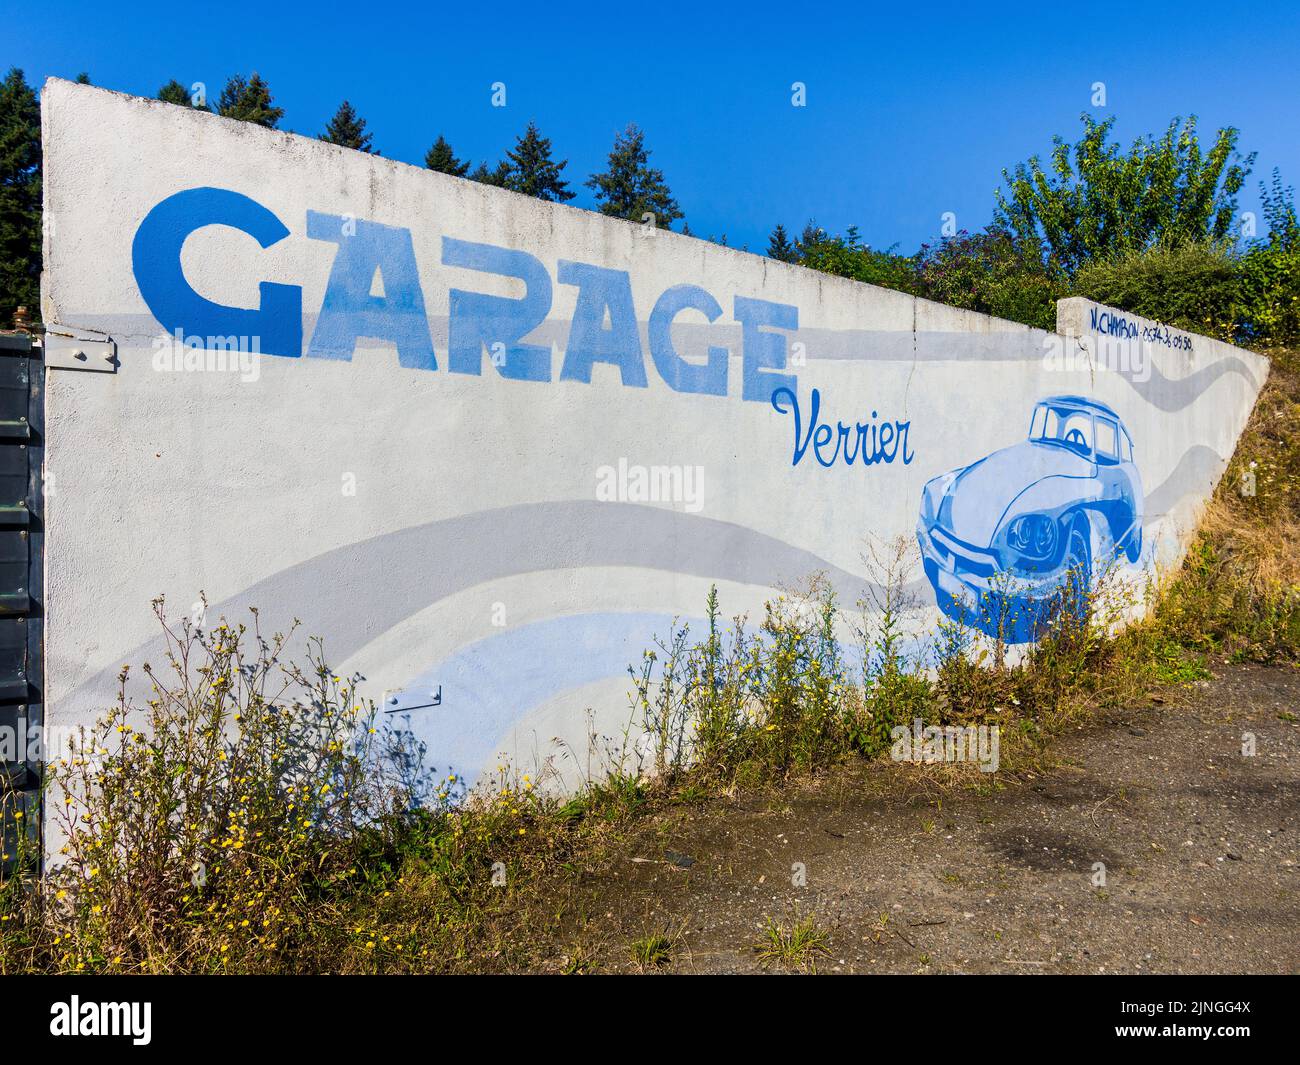 Faded advertising artwork of Citroen DS car on wall of closed garage - Le-Pont-Chretien-Chabenet, Indre (36), France. Stock Photo